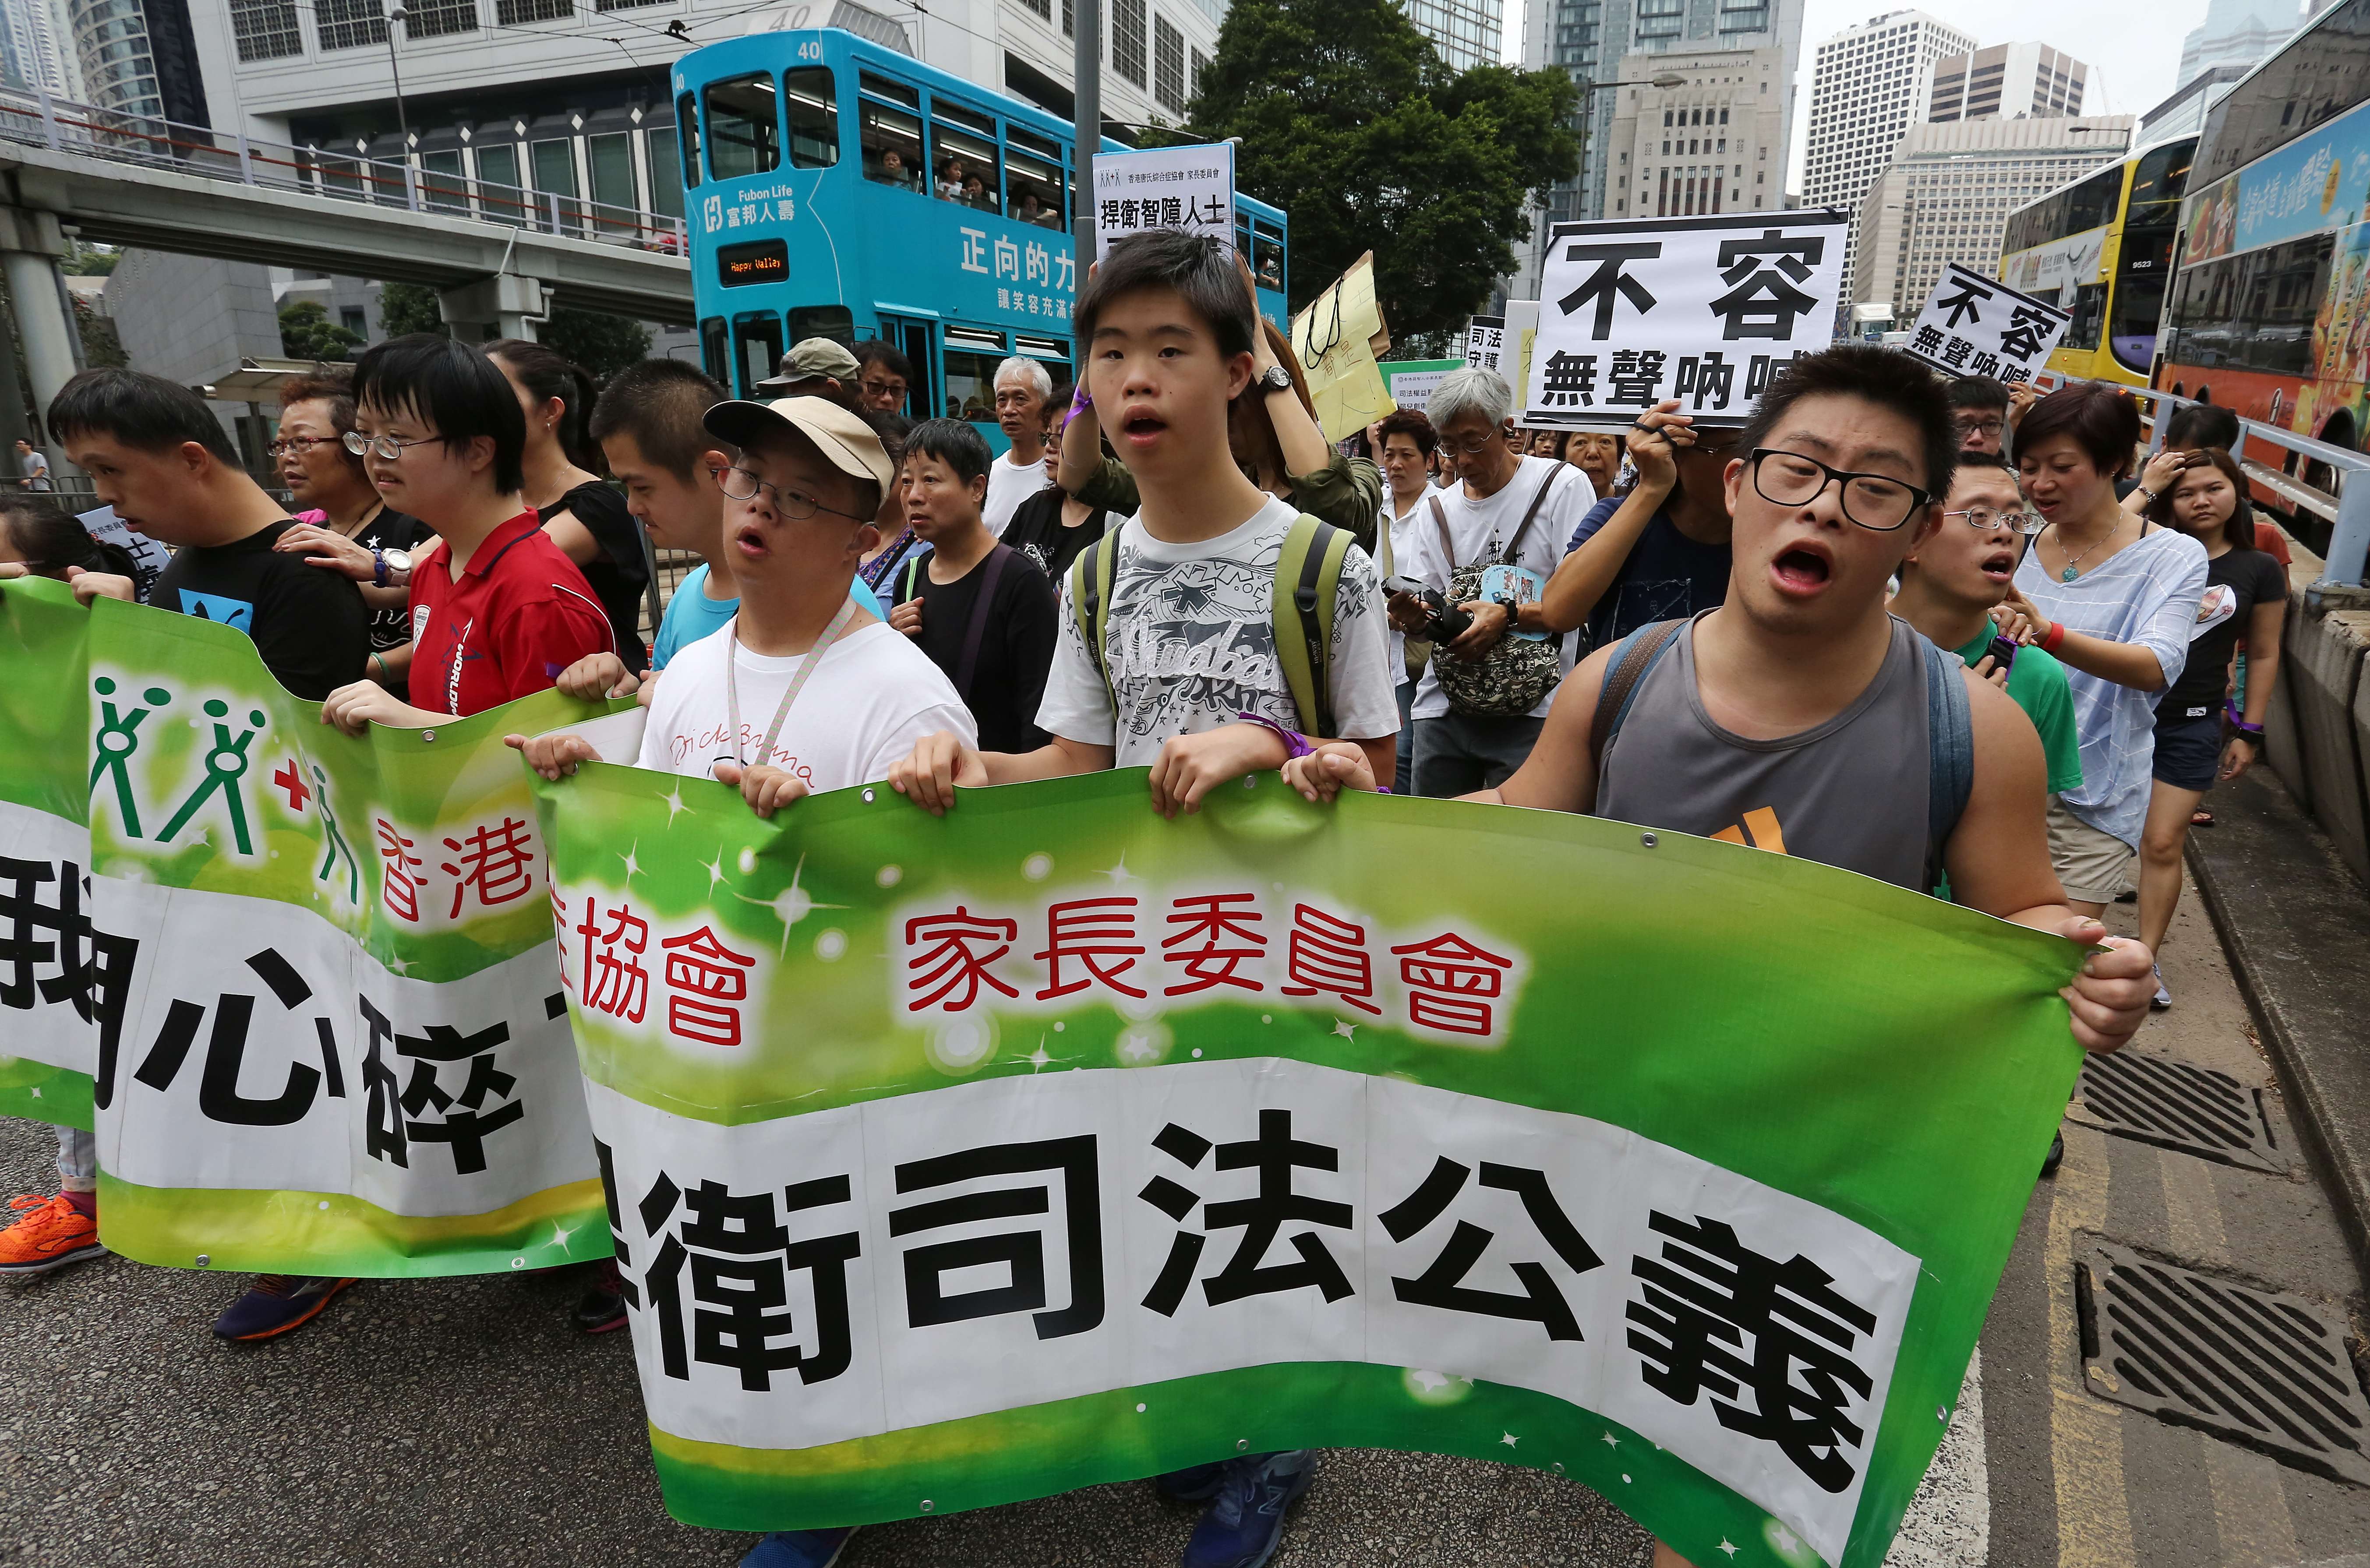 Concern groups protest against the dropping of sexual assault charges against the former head of a care home in Kwai Chung, on the grounds that the victim was unfit to give evidence due to post-traumatic stress. Photo: Jonathan Wong